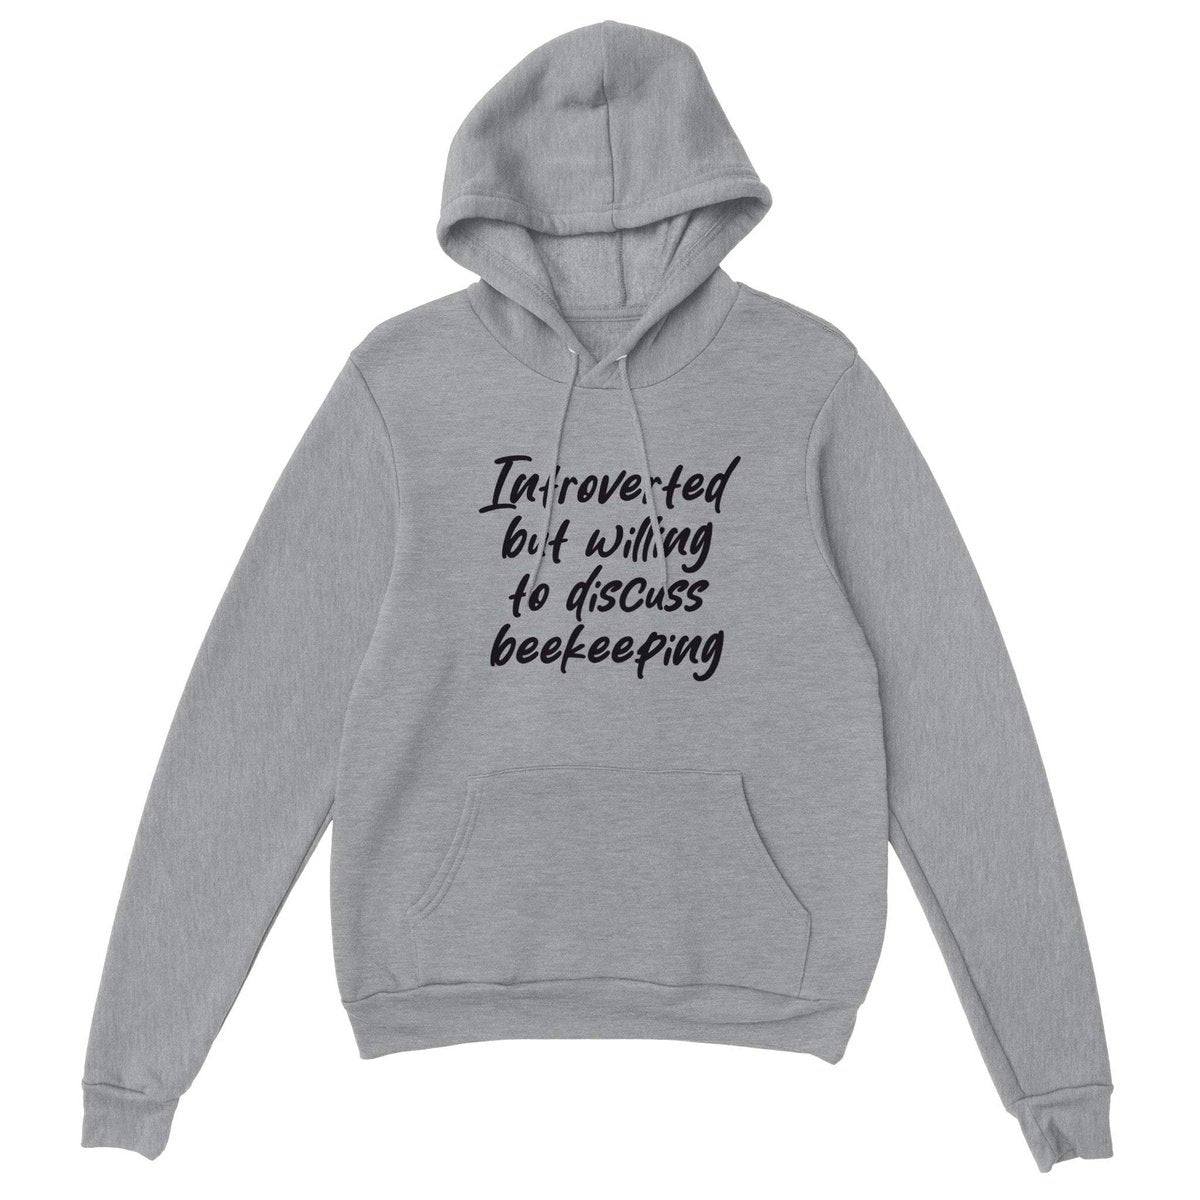 Introverted but willing to discuss beekeeping Hoodie - Premium Unisex Pullover Hoodie Australia Online Color Sports Grey / XS